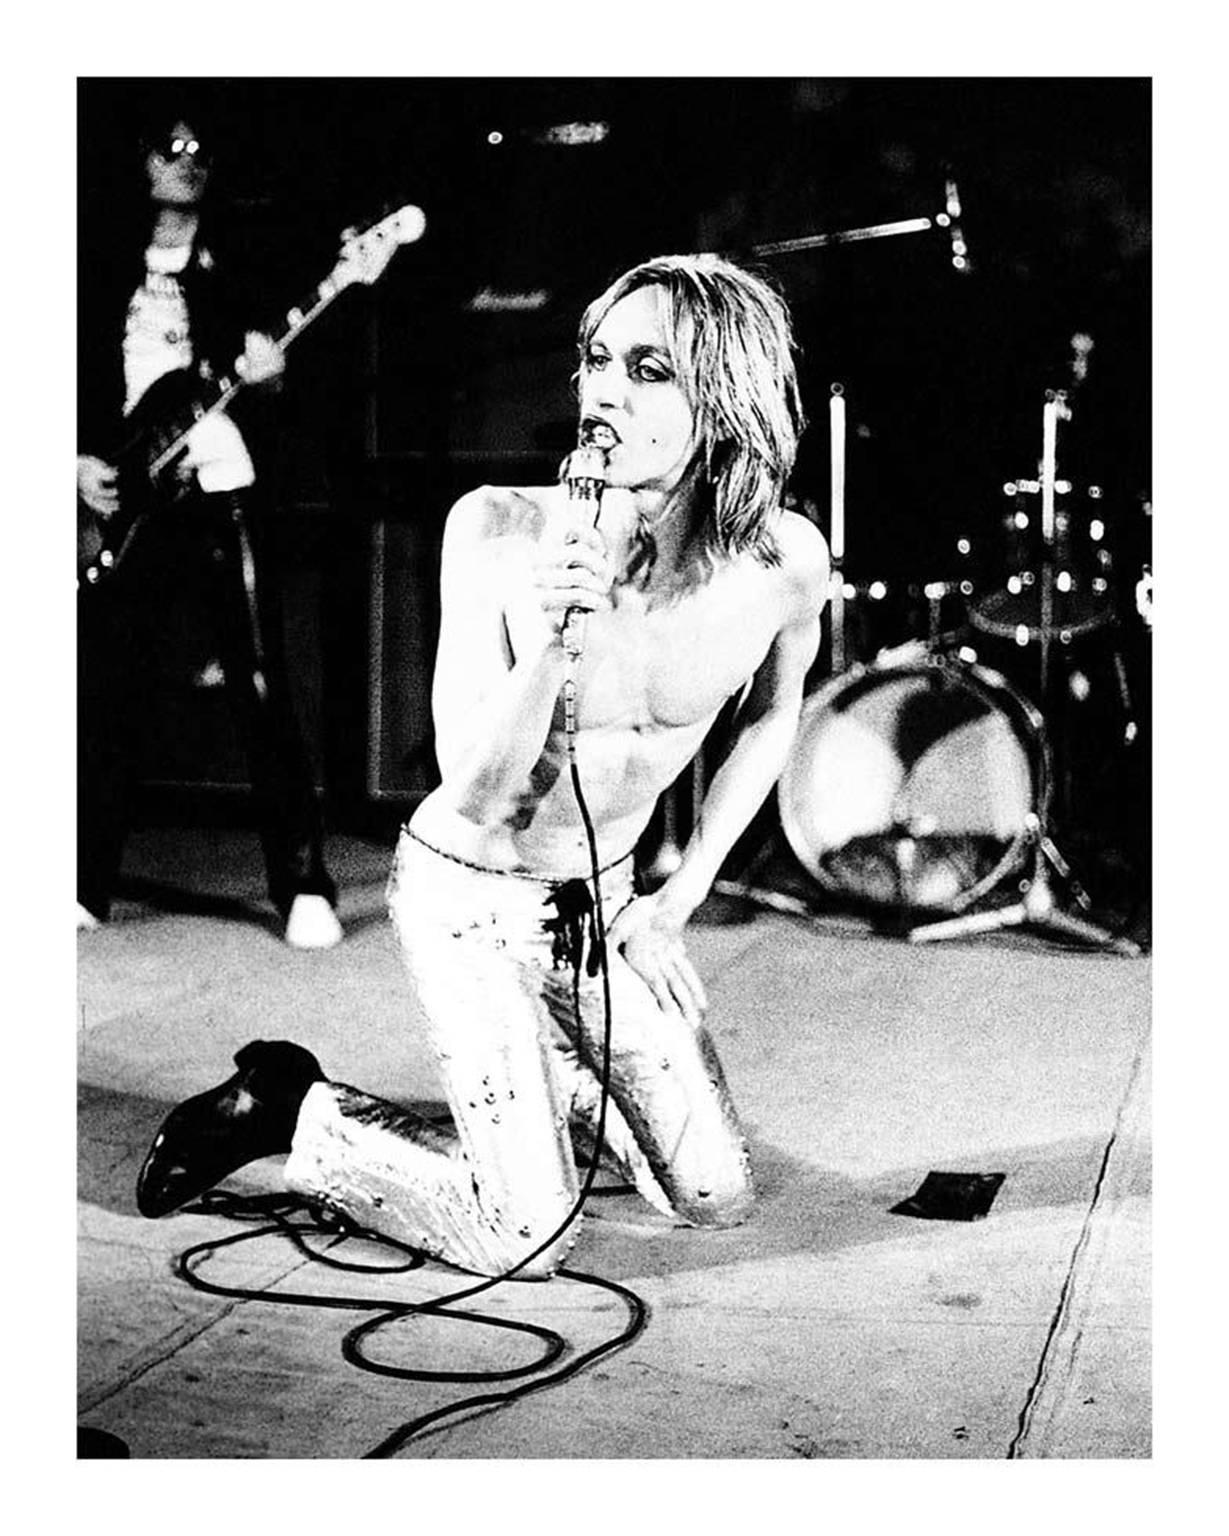 Mick Rock Black and White Photograph - Iggy Pop on Knees